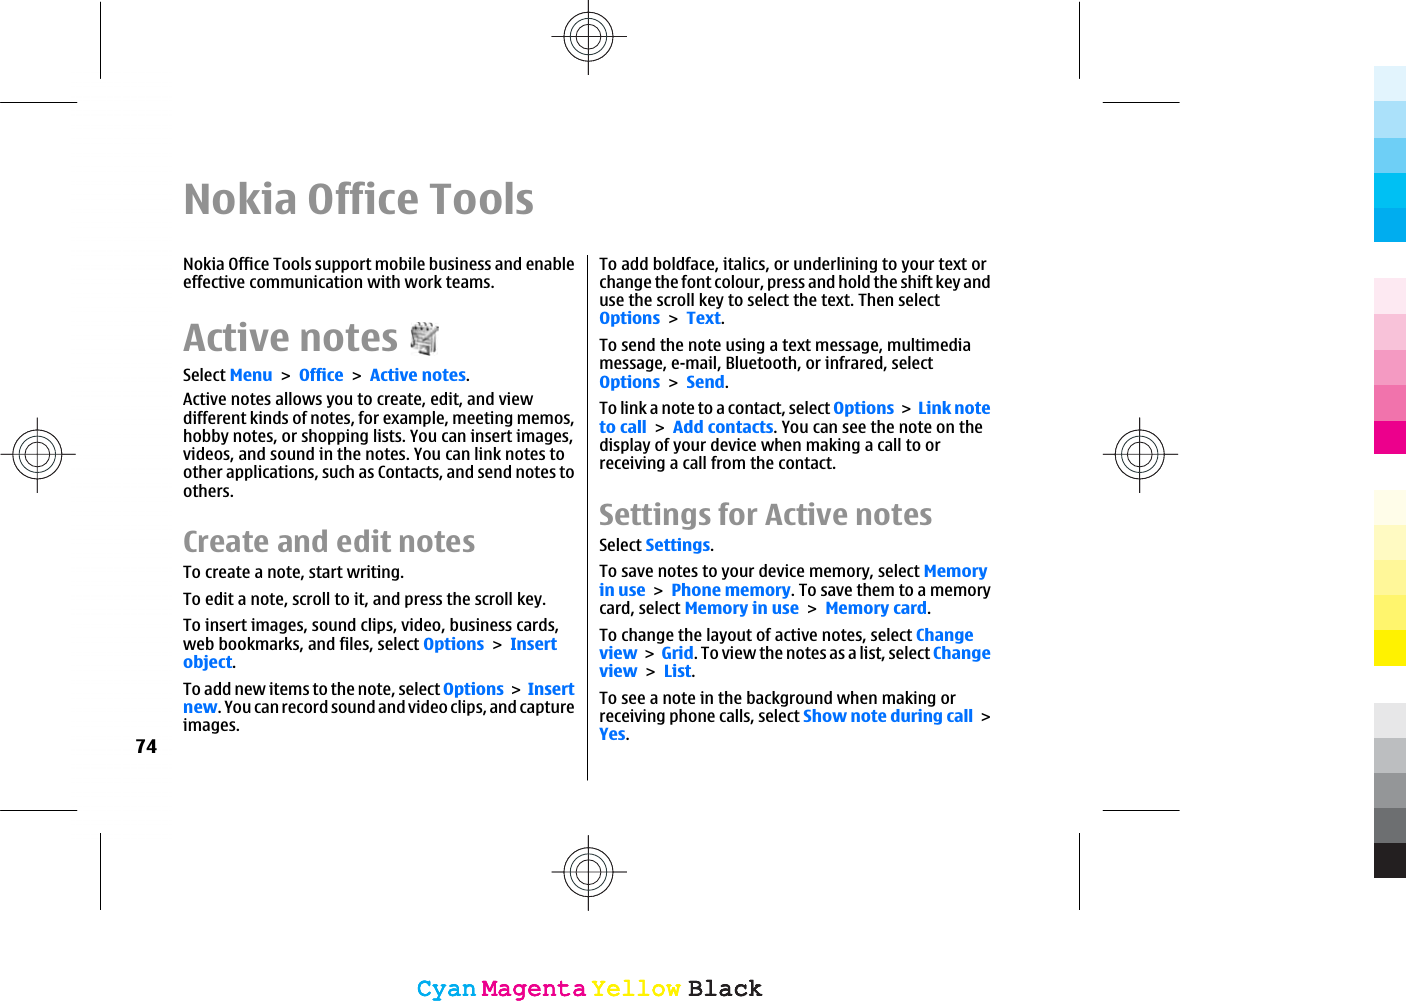 Nokia Office ToolsNokia Office Tools support mobile business and enableeffective communication with work teams.Active notesSelect MenuOfficeActive notes.Active notes allows you to create, edit, and viewdifferent kinds of notes, for example, meeting memos,hobby notes, or shopping lists. You can insert images,videos, and sound in the notes. You can link notes toother applications, such as Contacts, and send notes toothers.Create and edit notesTo create a note, start writing.To edit a note, scroll to it, and press the scroll key.To insert images, sound clips, video, business cards,web bookmarks, and files, select OptionsInsertobject.To add new items to the note, select OptionsInsertnew. You can record sound and video clips, and captureimages.To add boldface, italics, or underlining to your text orchange the font colour, press and hold the shift key anduse the scroll key to select the text. Then selectOptionsText.To send the note using a text message, multimediamessage, e-mail, Bluetooth, or infrared, selectOptionsSend.To link a note to a contact, select OptionsLink noteto callAdd contacts. You can see the note on thedisplay of your device when making a call to orreceiving a call from the contact.Settings for Active notesSelect Settings.To save notes to your device memory, select Memoryin usePhone memory. To save them to a memorycard, select Memory in useMemory card.To change the layout of active notes, select ChangeviewGrid. To view the notes as a list, select ChangeviewList.To see a note in the background when making orreceiving phone calls, select Show note during callYes.74CyanCyanMagentaMagentaYellowYellowBlackBlackCyanCyanMagentaMagentaYellowYellowBlackBlack